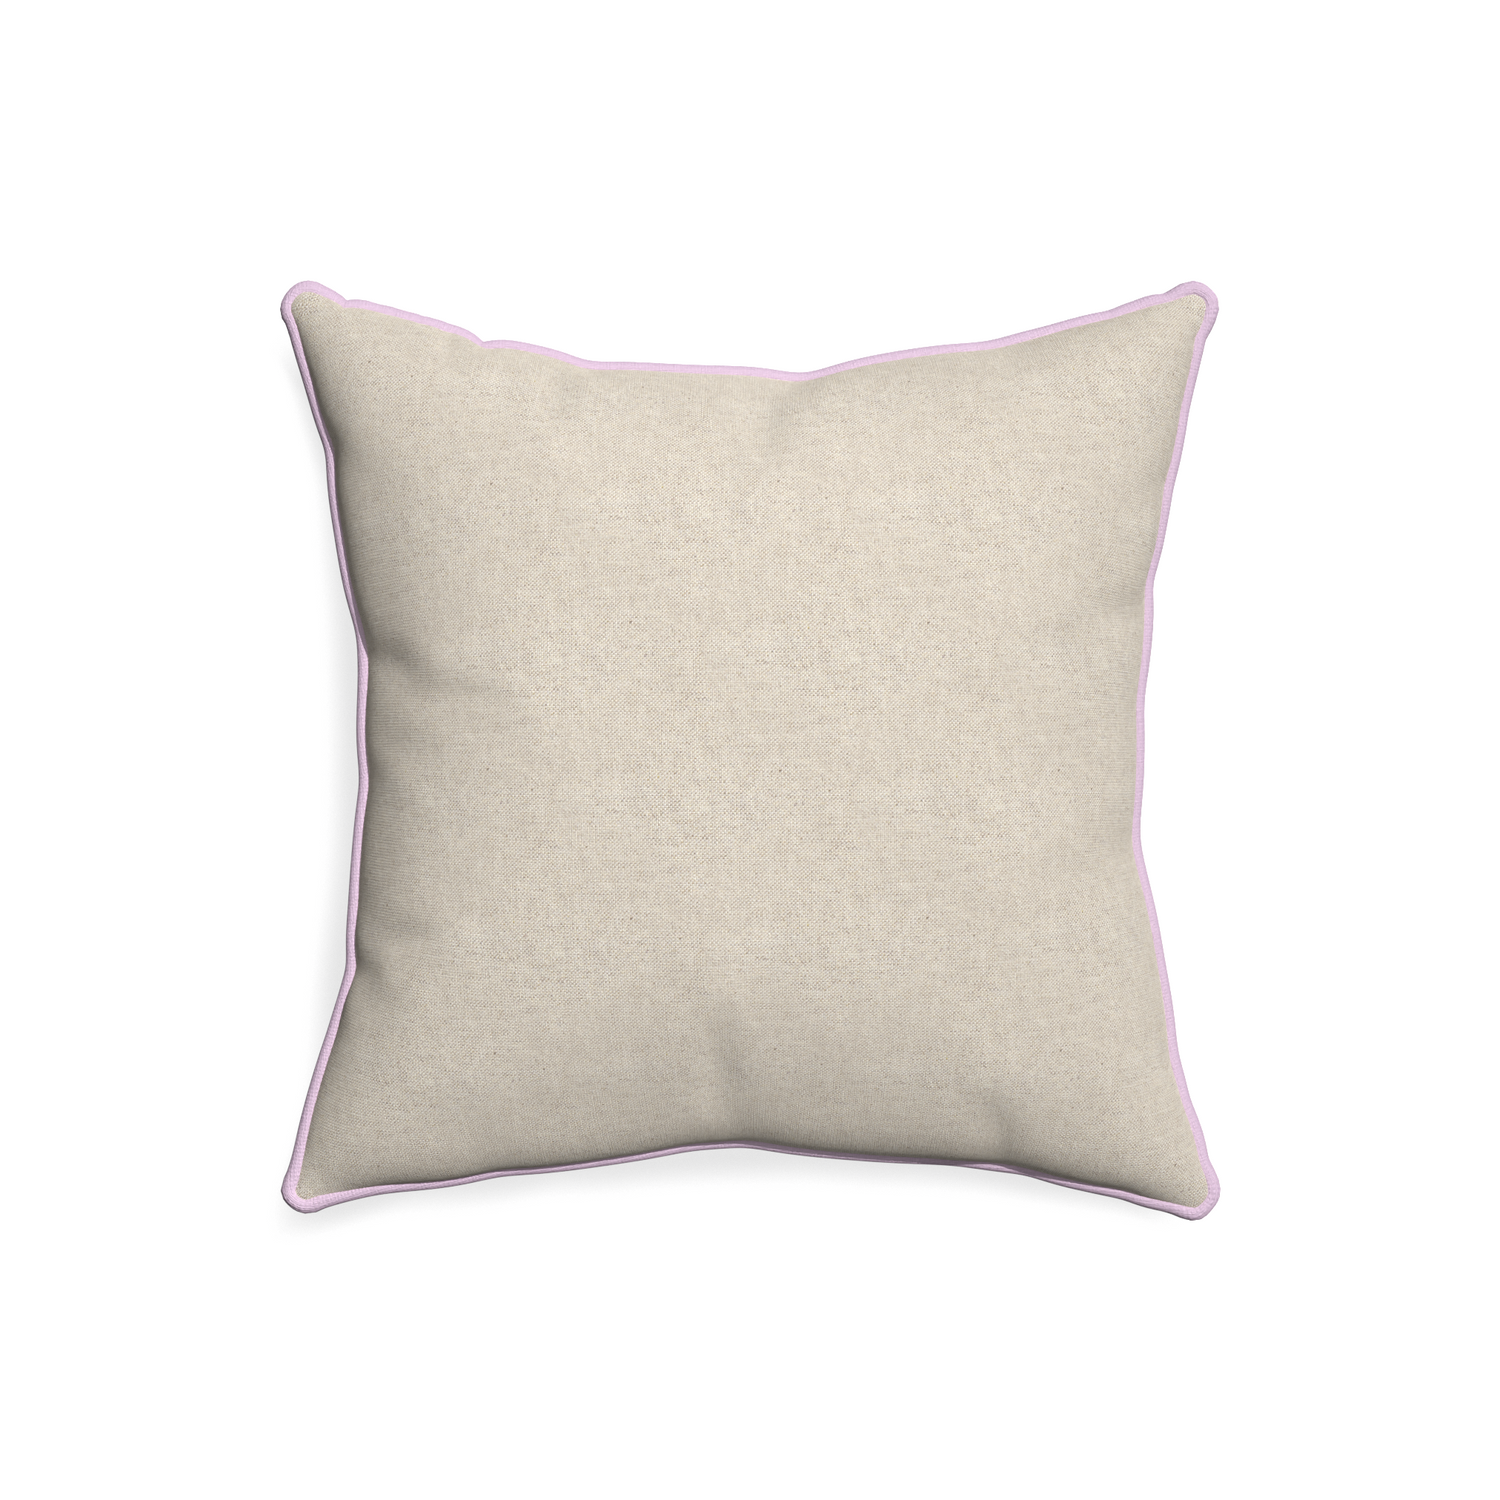 20-square oat custom light brownpillow with l piping on white background